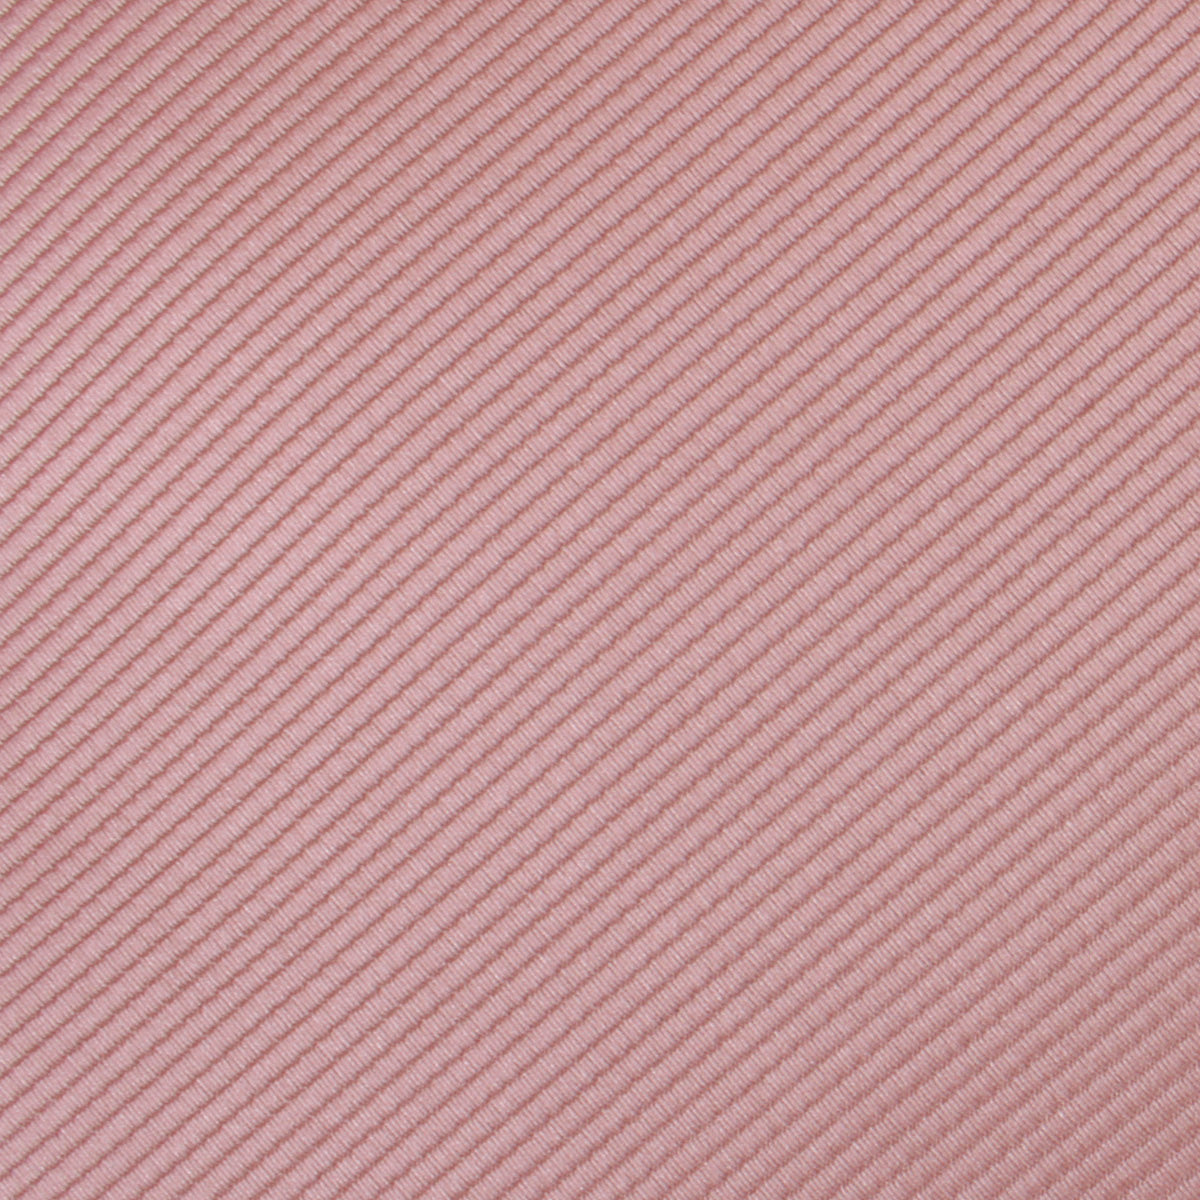 Dusty Rose Vintage Twill Self Bow Tie Fabric